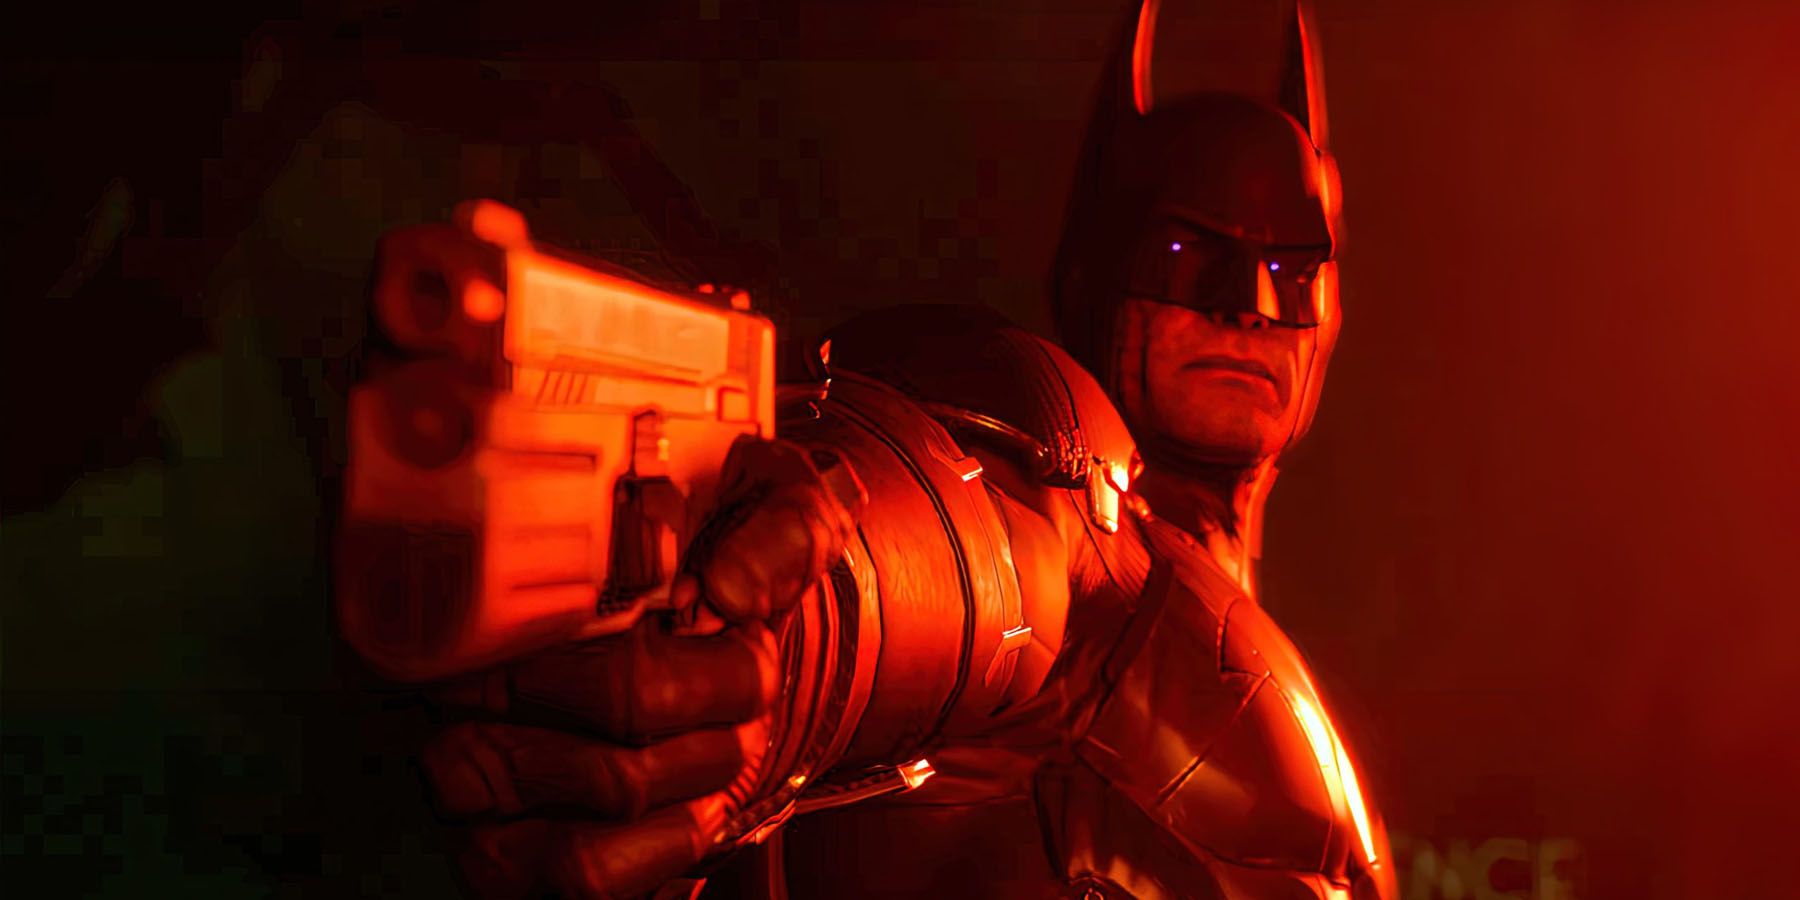 A screenshot of Batman aiming a gun in red light in Suicide Squad: Kill the Justice League.